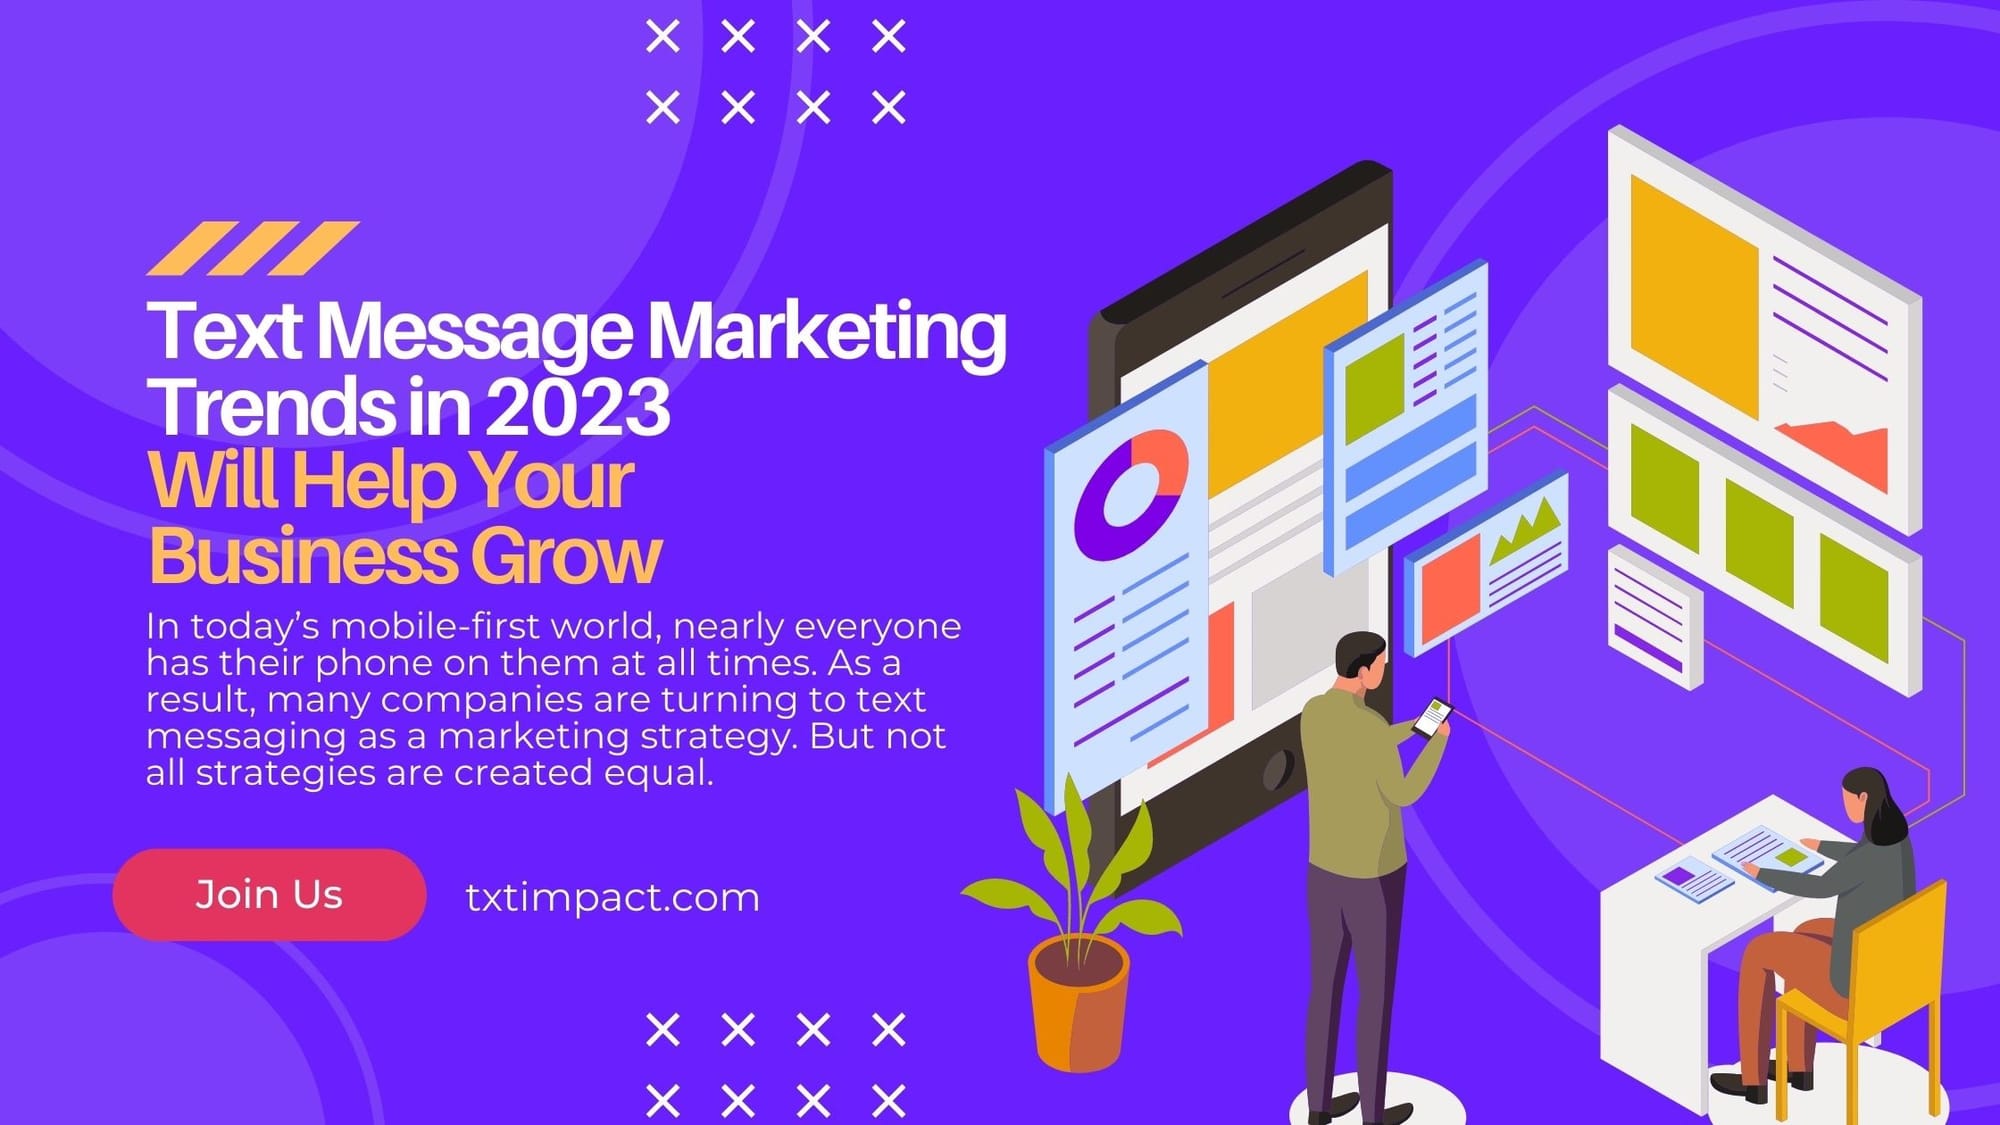 Text Message Marketing Trends in 2023 that Will Help Your Business Grow.jpg